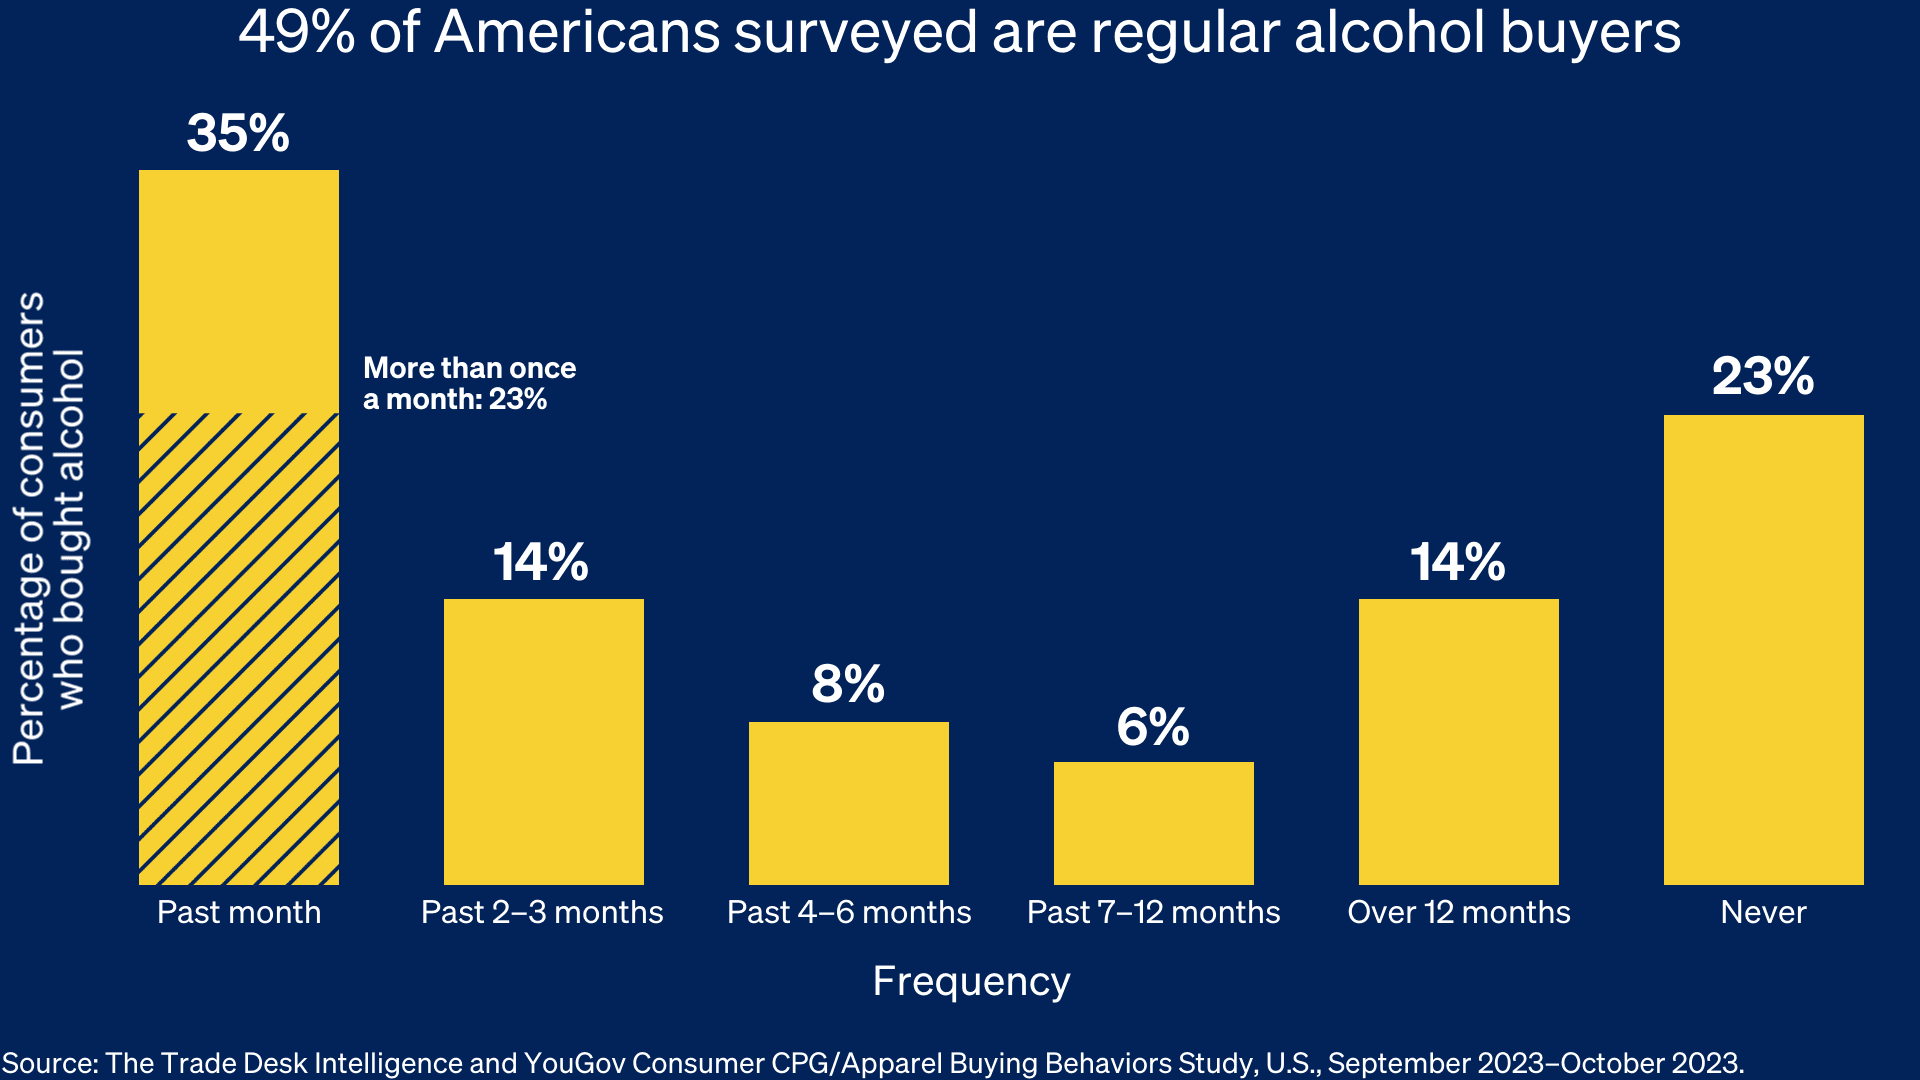 The Readout graph showing that 49% of Americans surveyed are regular alcohol buyers.